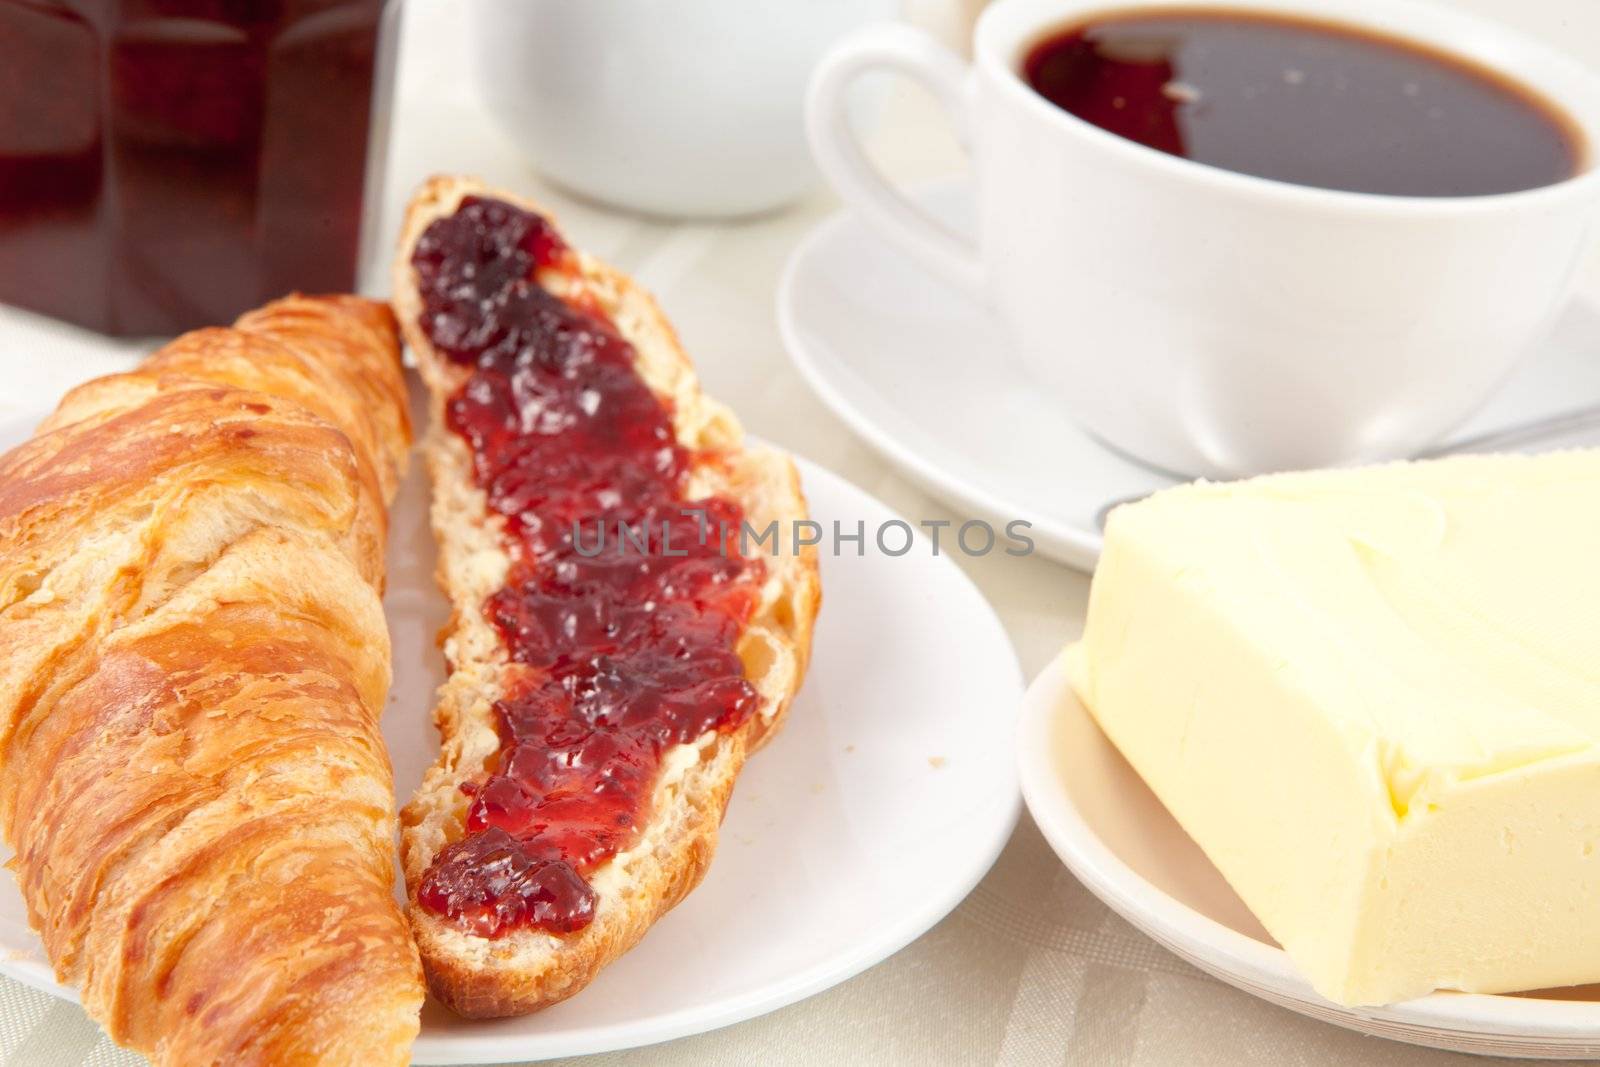 Breakfast with a croissant spread with jam indoors